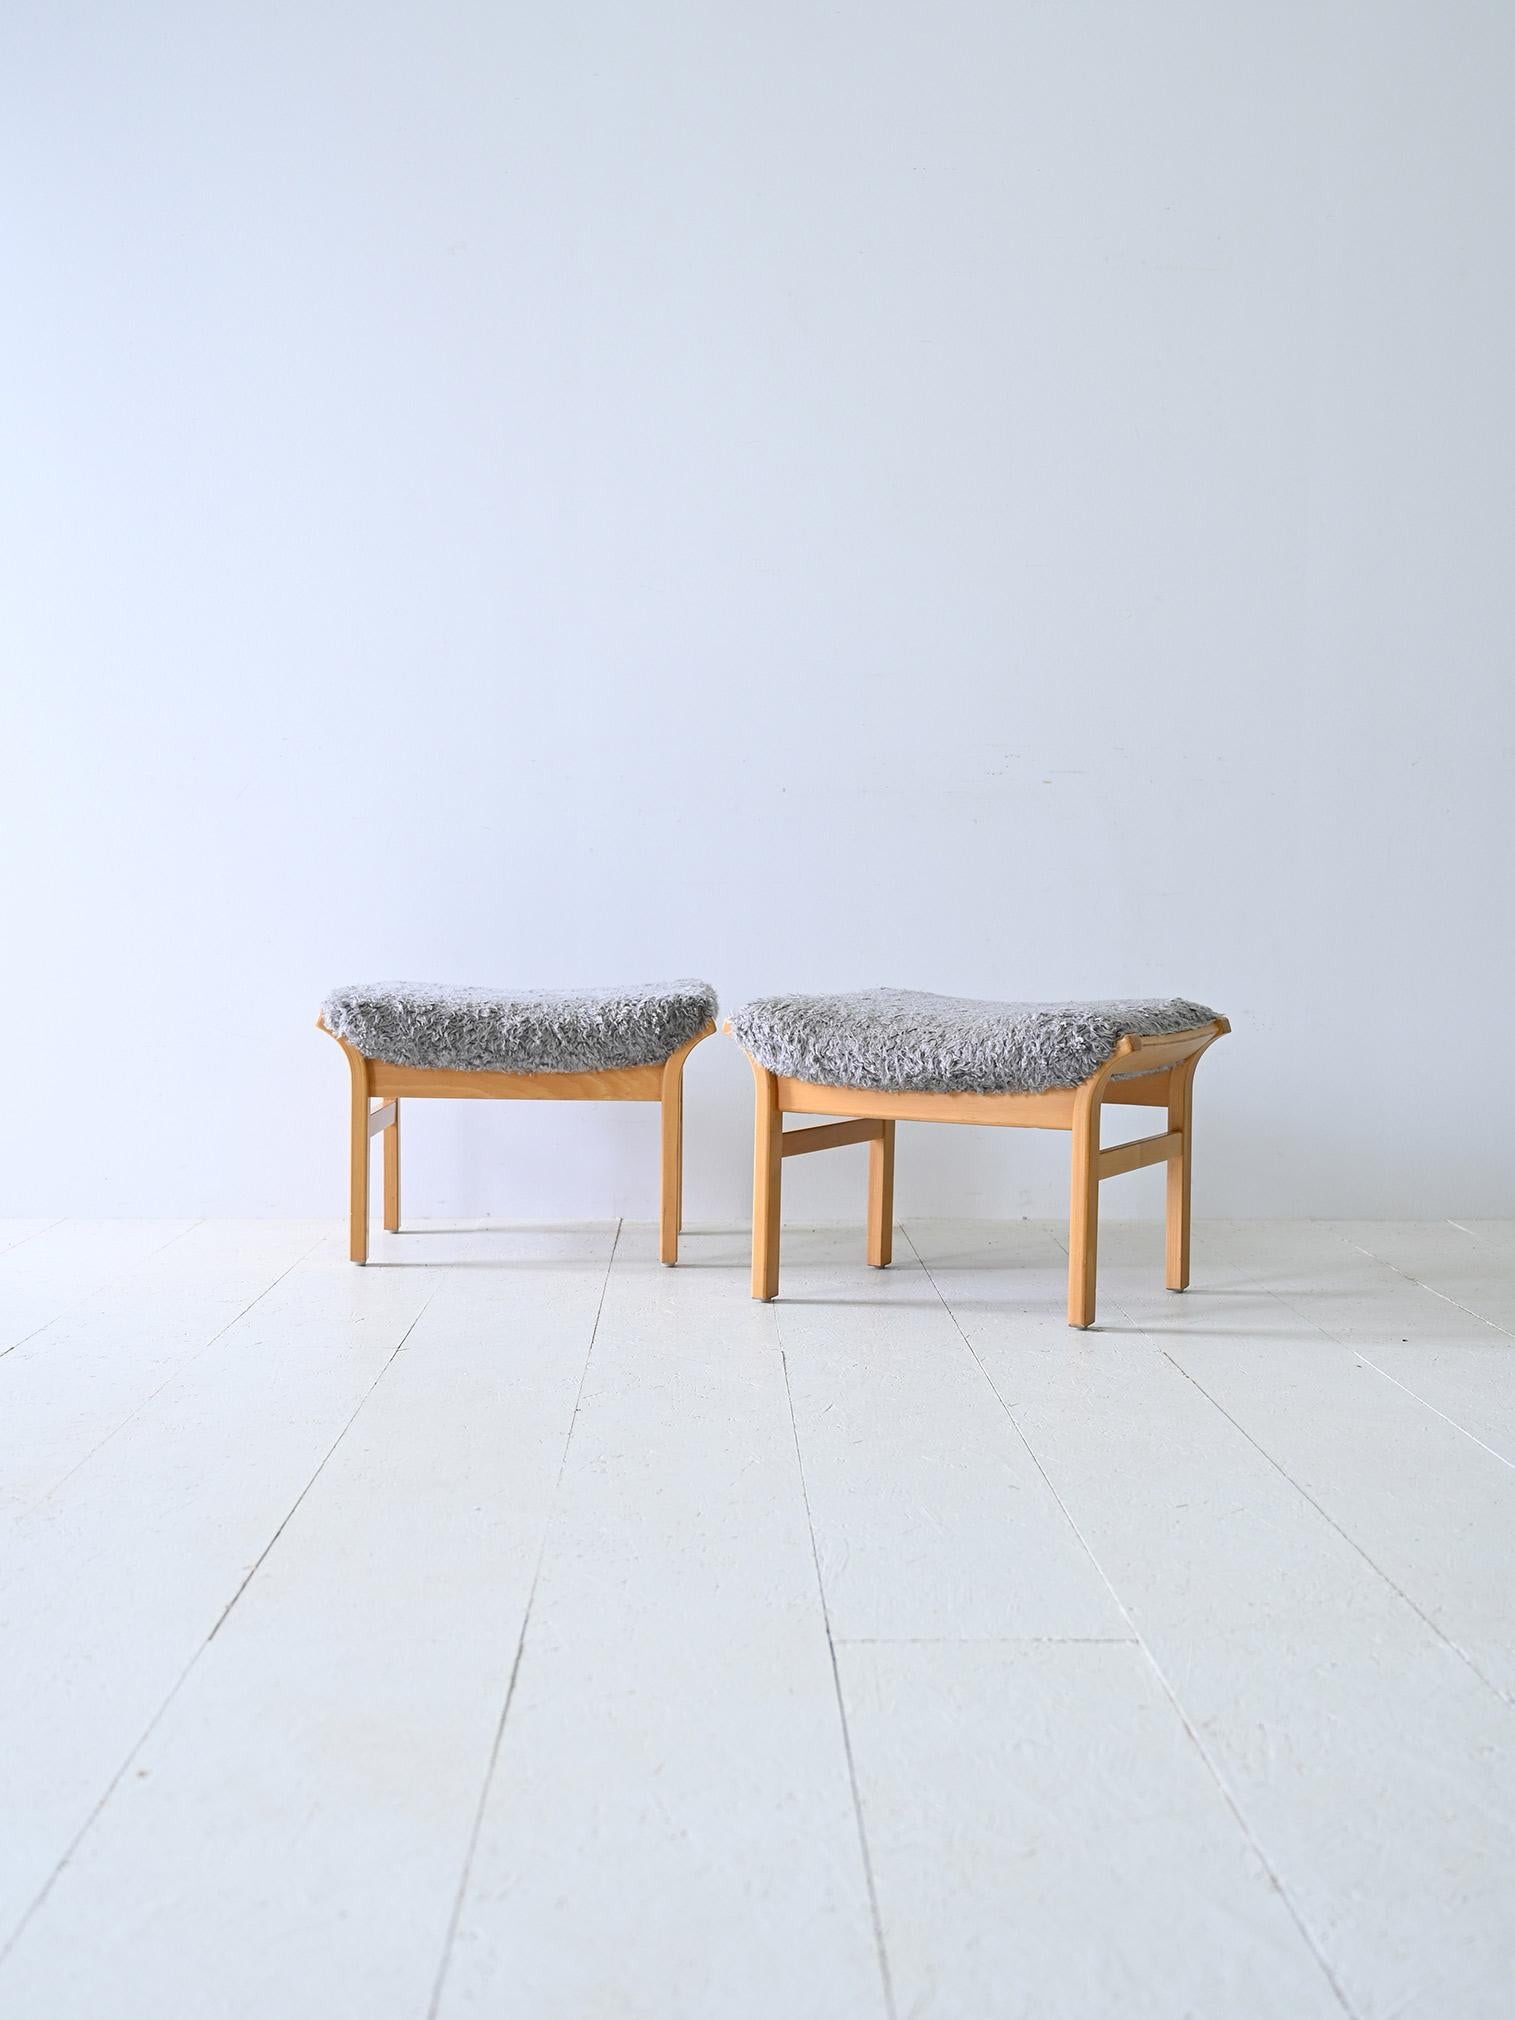 Pair of wooden stools of Scandinavian manufacture.

With slightly squared legs and a light wood frame, these ottomans offer a cozy, Nordic feel. The gray long-haired fabric seat creates a contrast with the wood, giving it a unique style.

The small